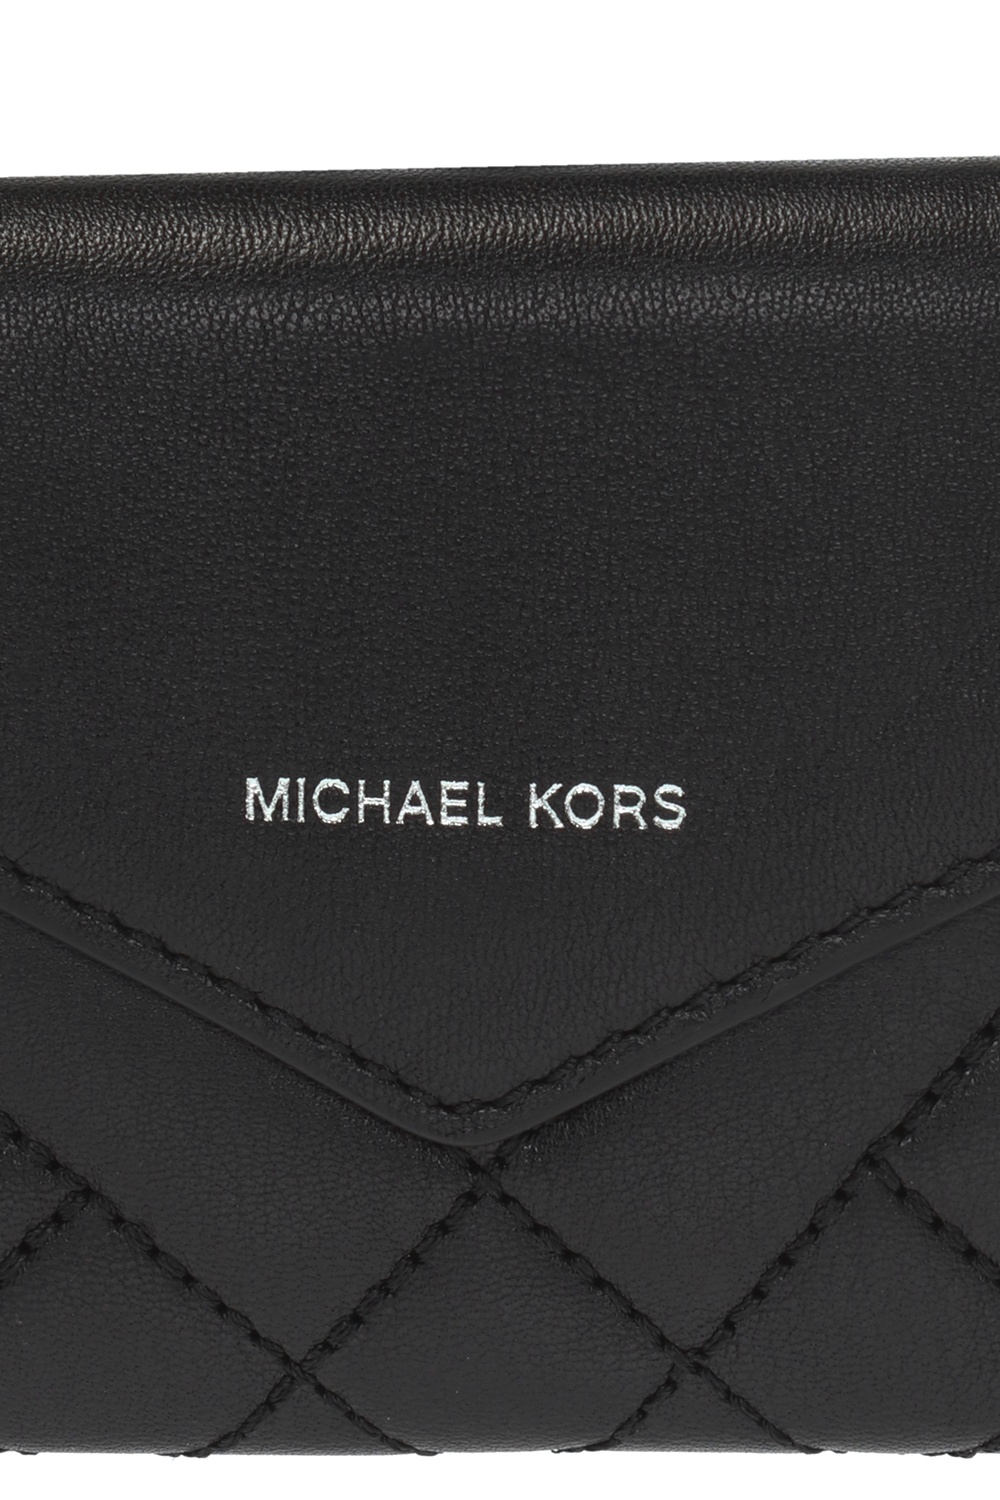 michael kors quilted wallet